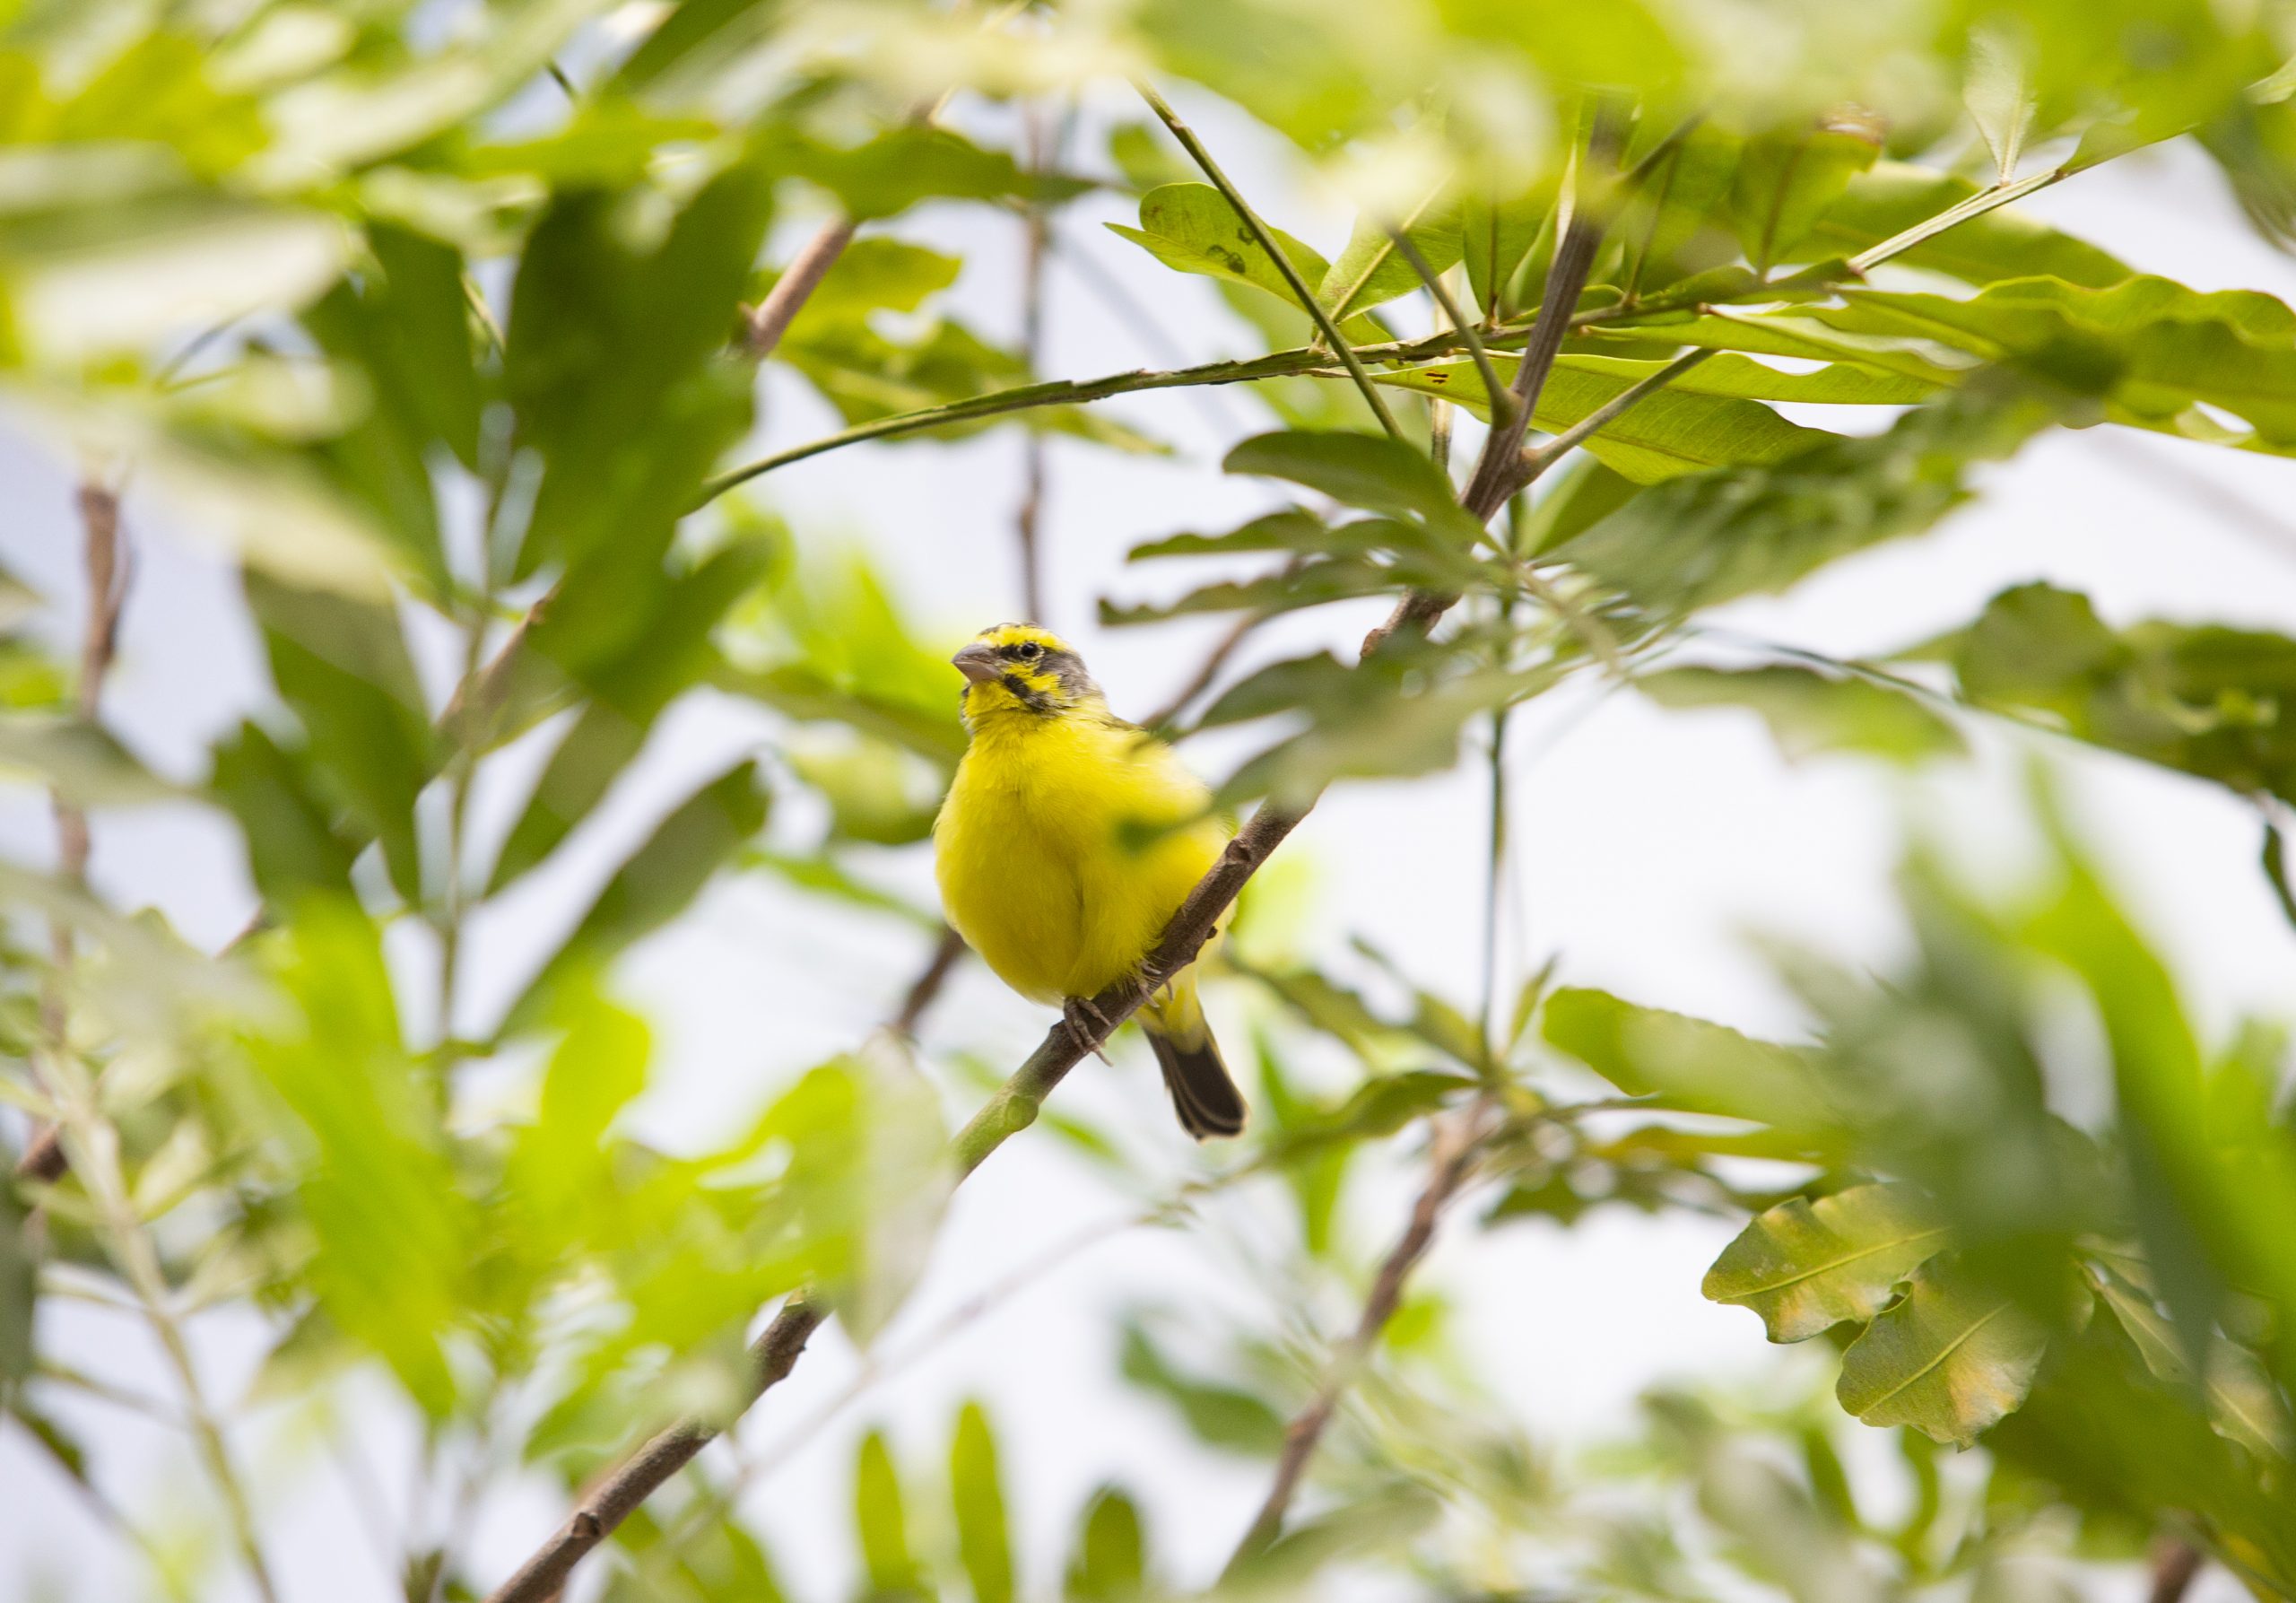 A Green Singing Finch perched on a branch